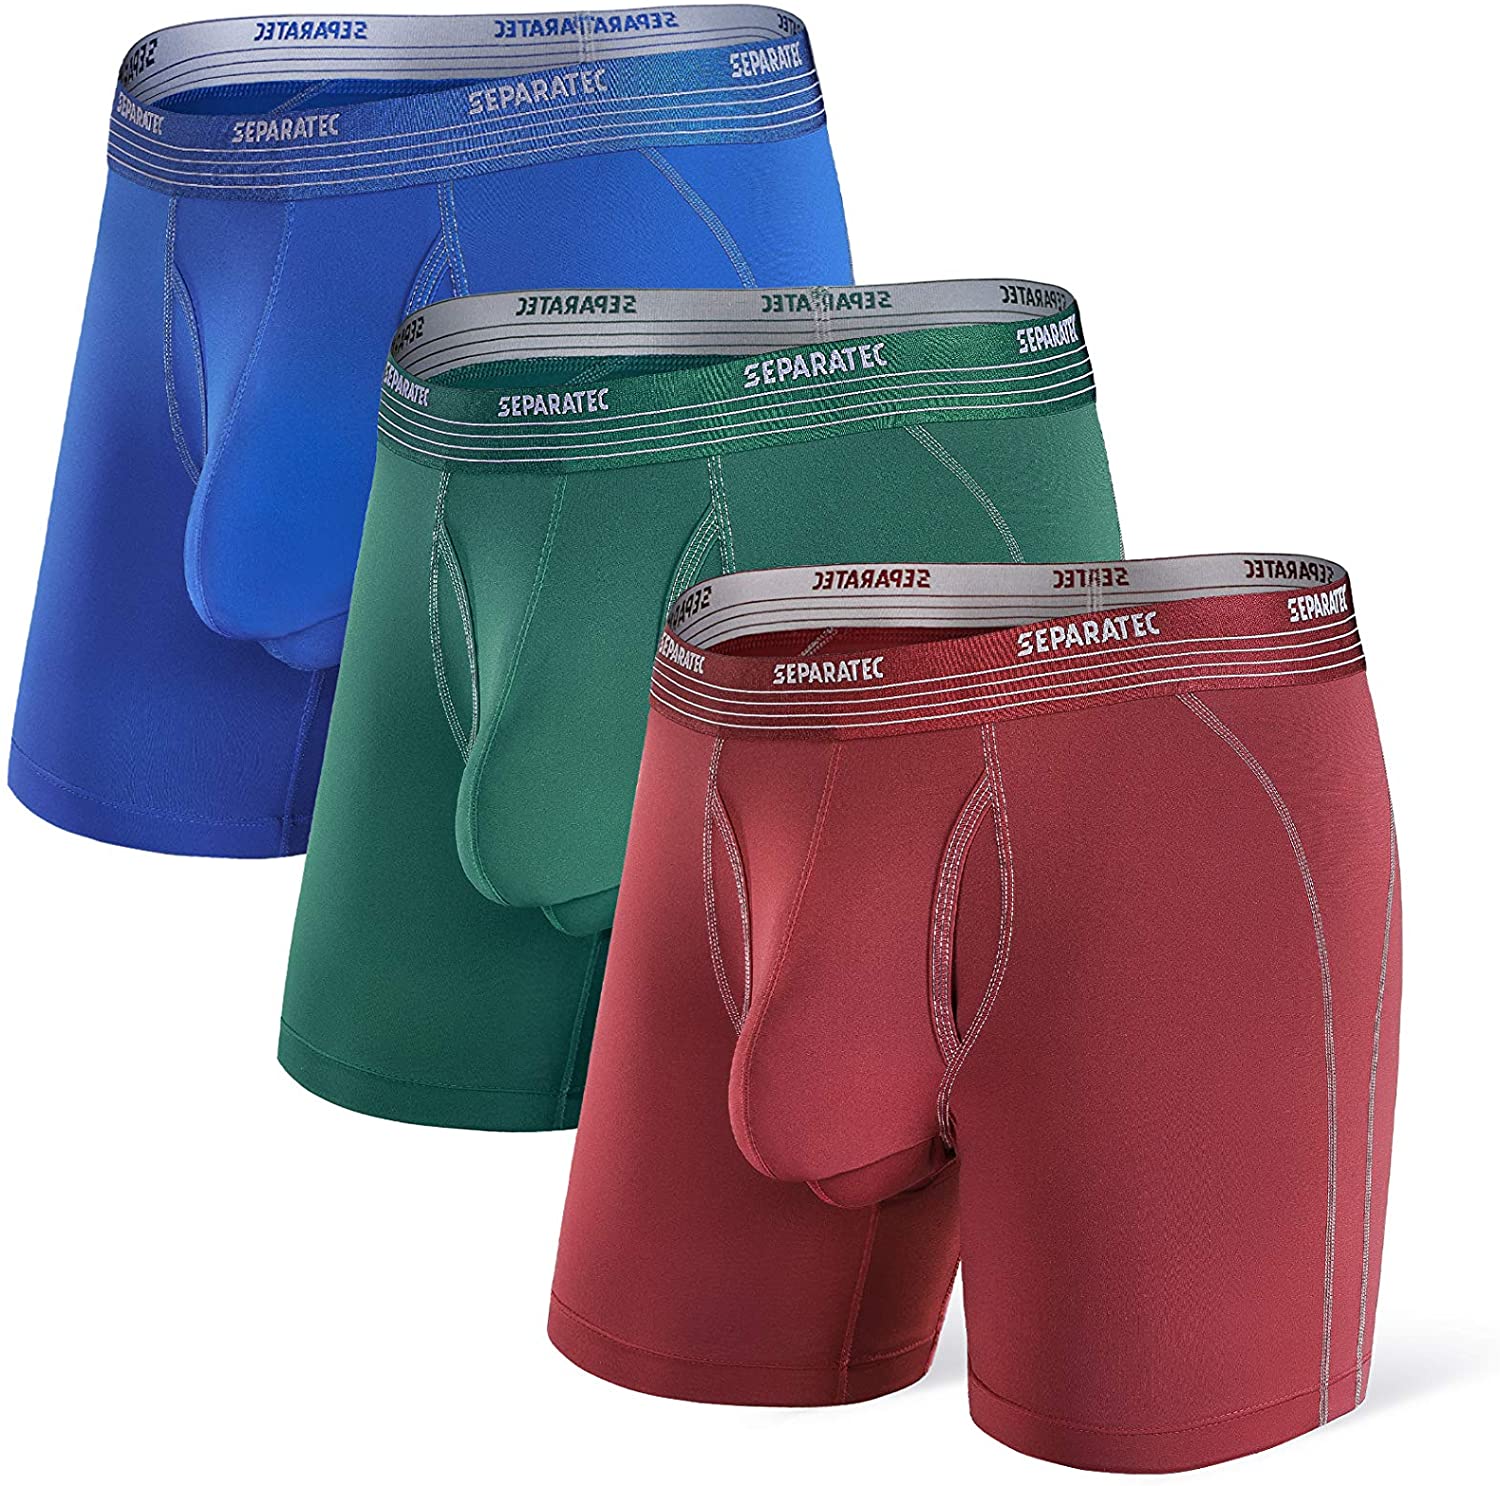 Men's Underwear Expert Separatec Introduces New Summer Offering Featuring  Dual Pouch™ and Quick-Dry Performance